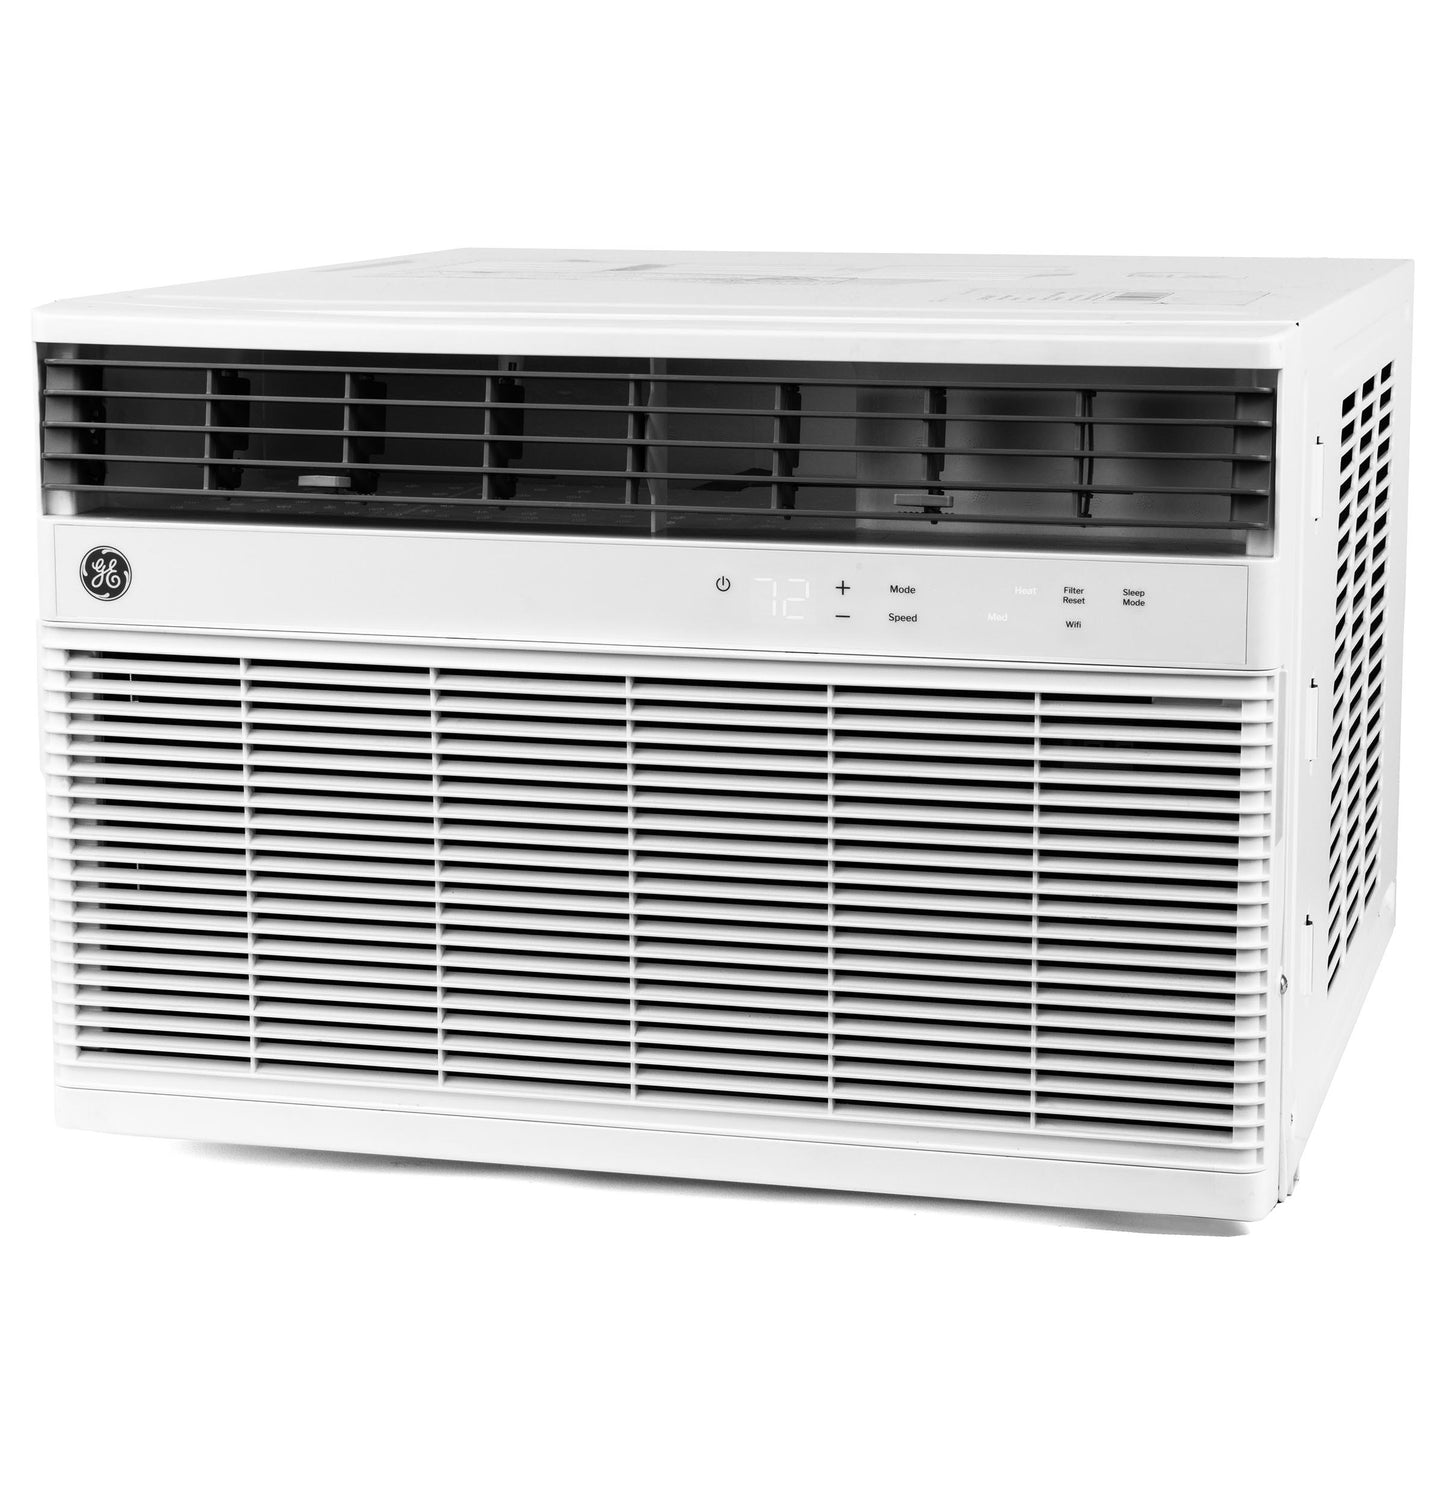 Ge Appliances AWGH12WWF Ge® 12,000 Btu Smart Heat/Cool Electronic Window Air Conditioner For Large Rooms Up To 550 Sq. Ft.